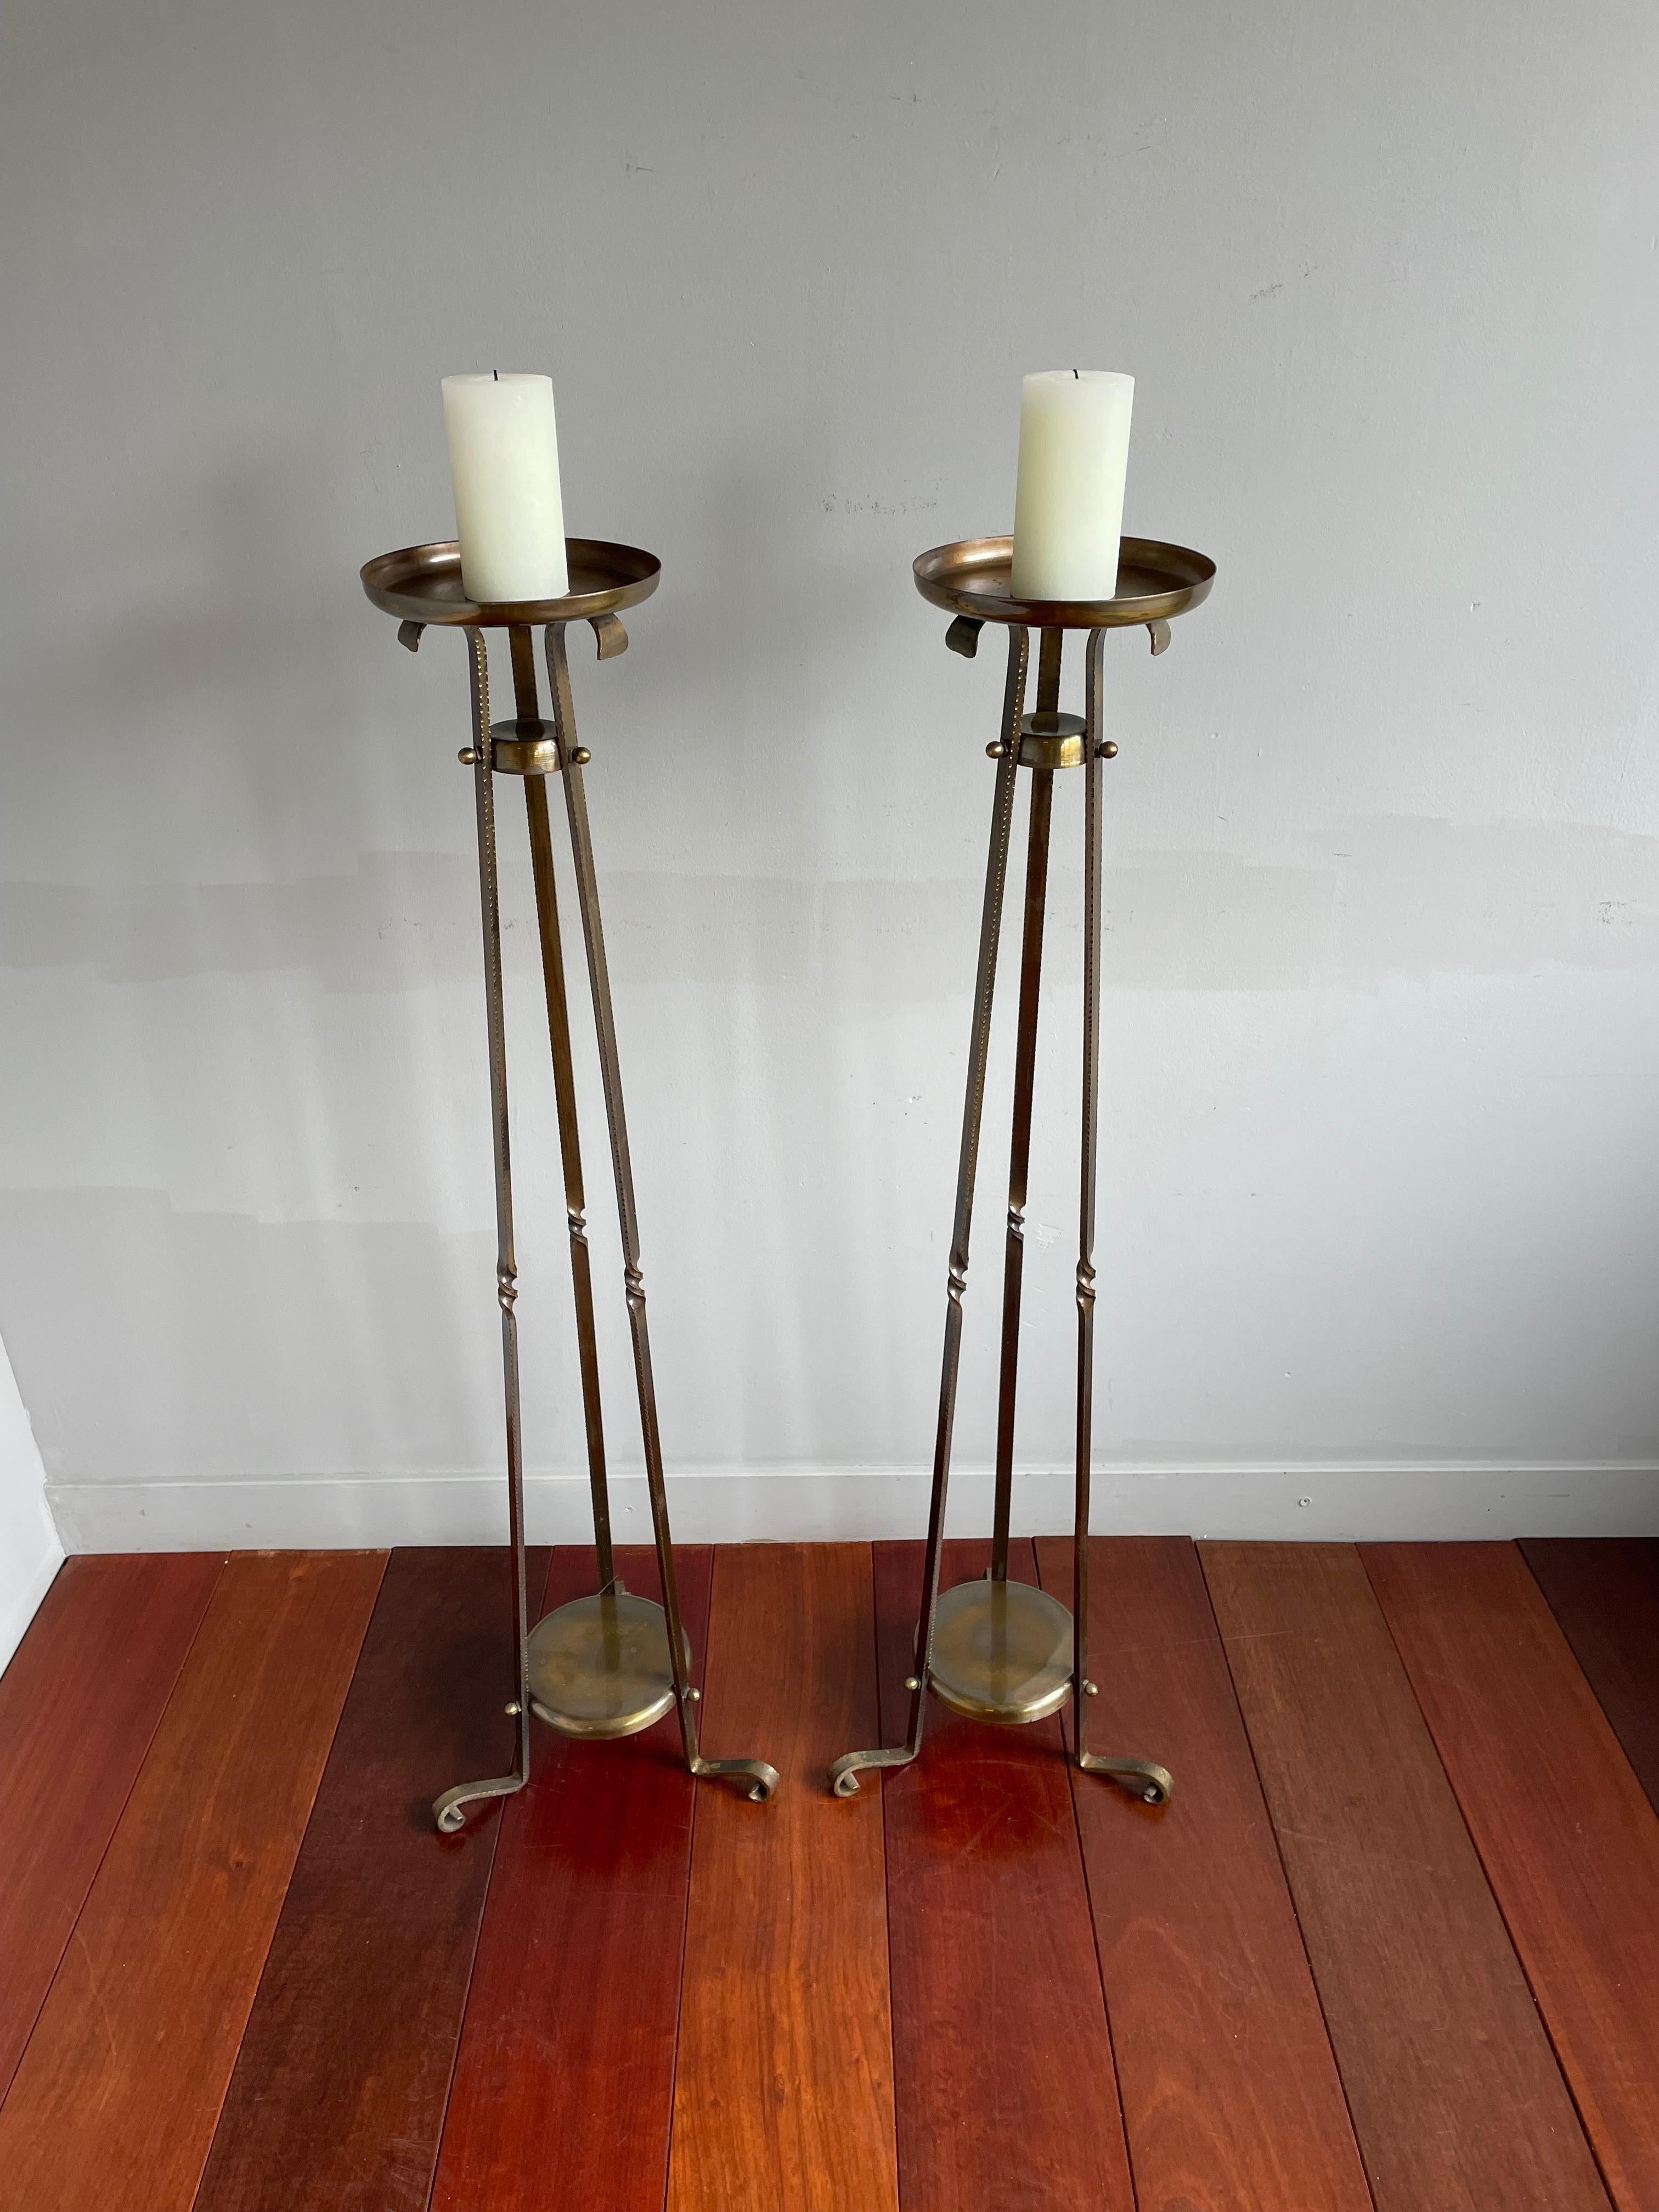 Rare and amazing condition, solid brass Arts & Crafts church altar candle stands.

This finest quality pair of church altar candle stands was all handcrafted in circa 1910-1920 and the bronze patinated solid brass has the most beautiful patina.